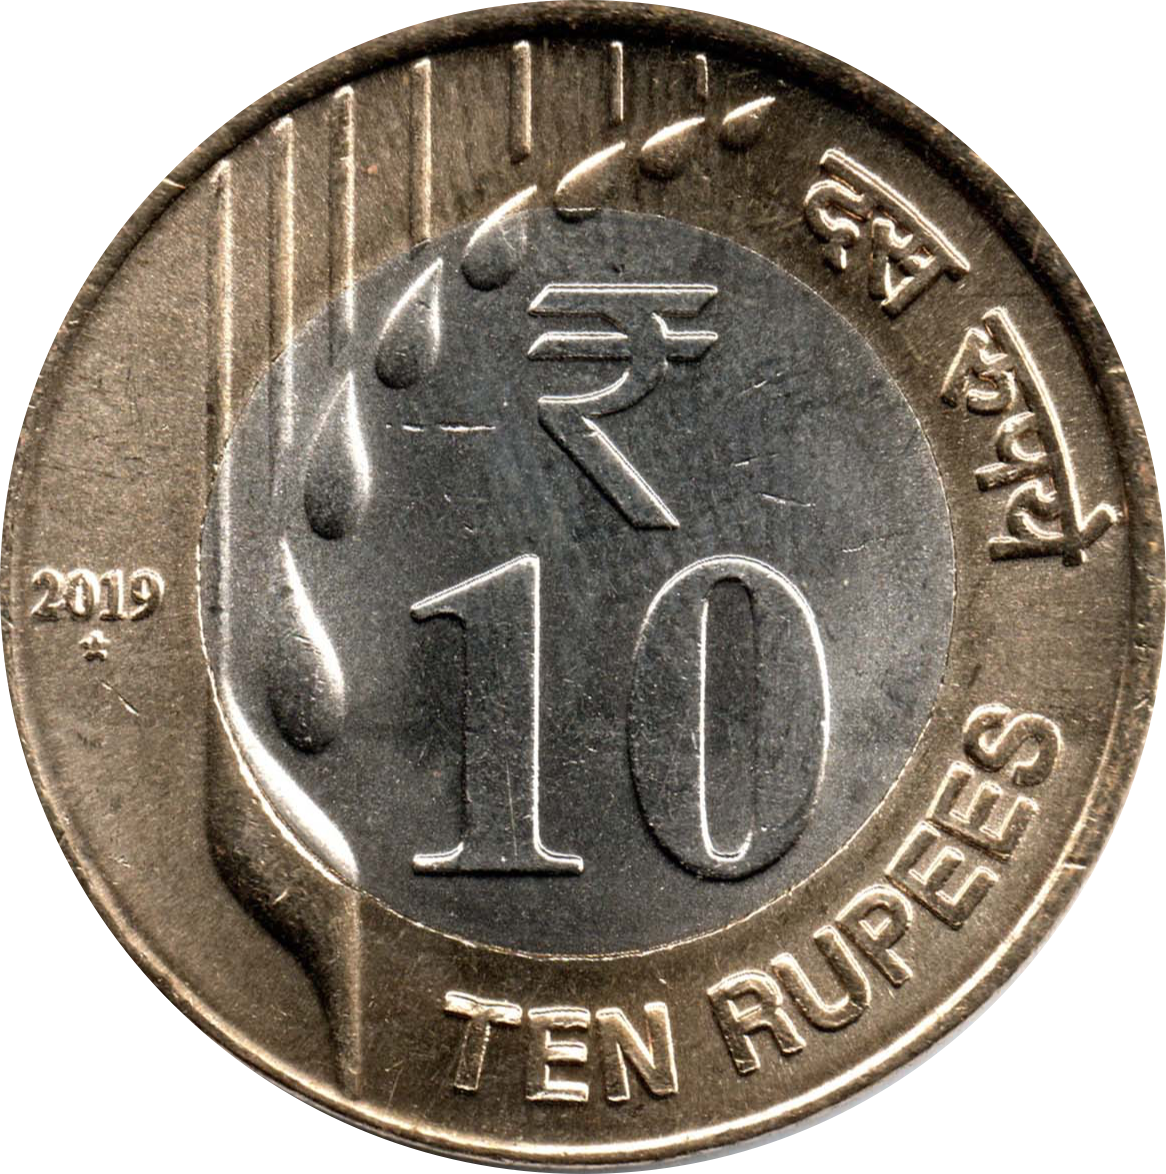 2, One Indian Rupee Coin Images, Stock Photos, 3D objects, & Vectors | Shutterstock